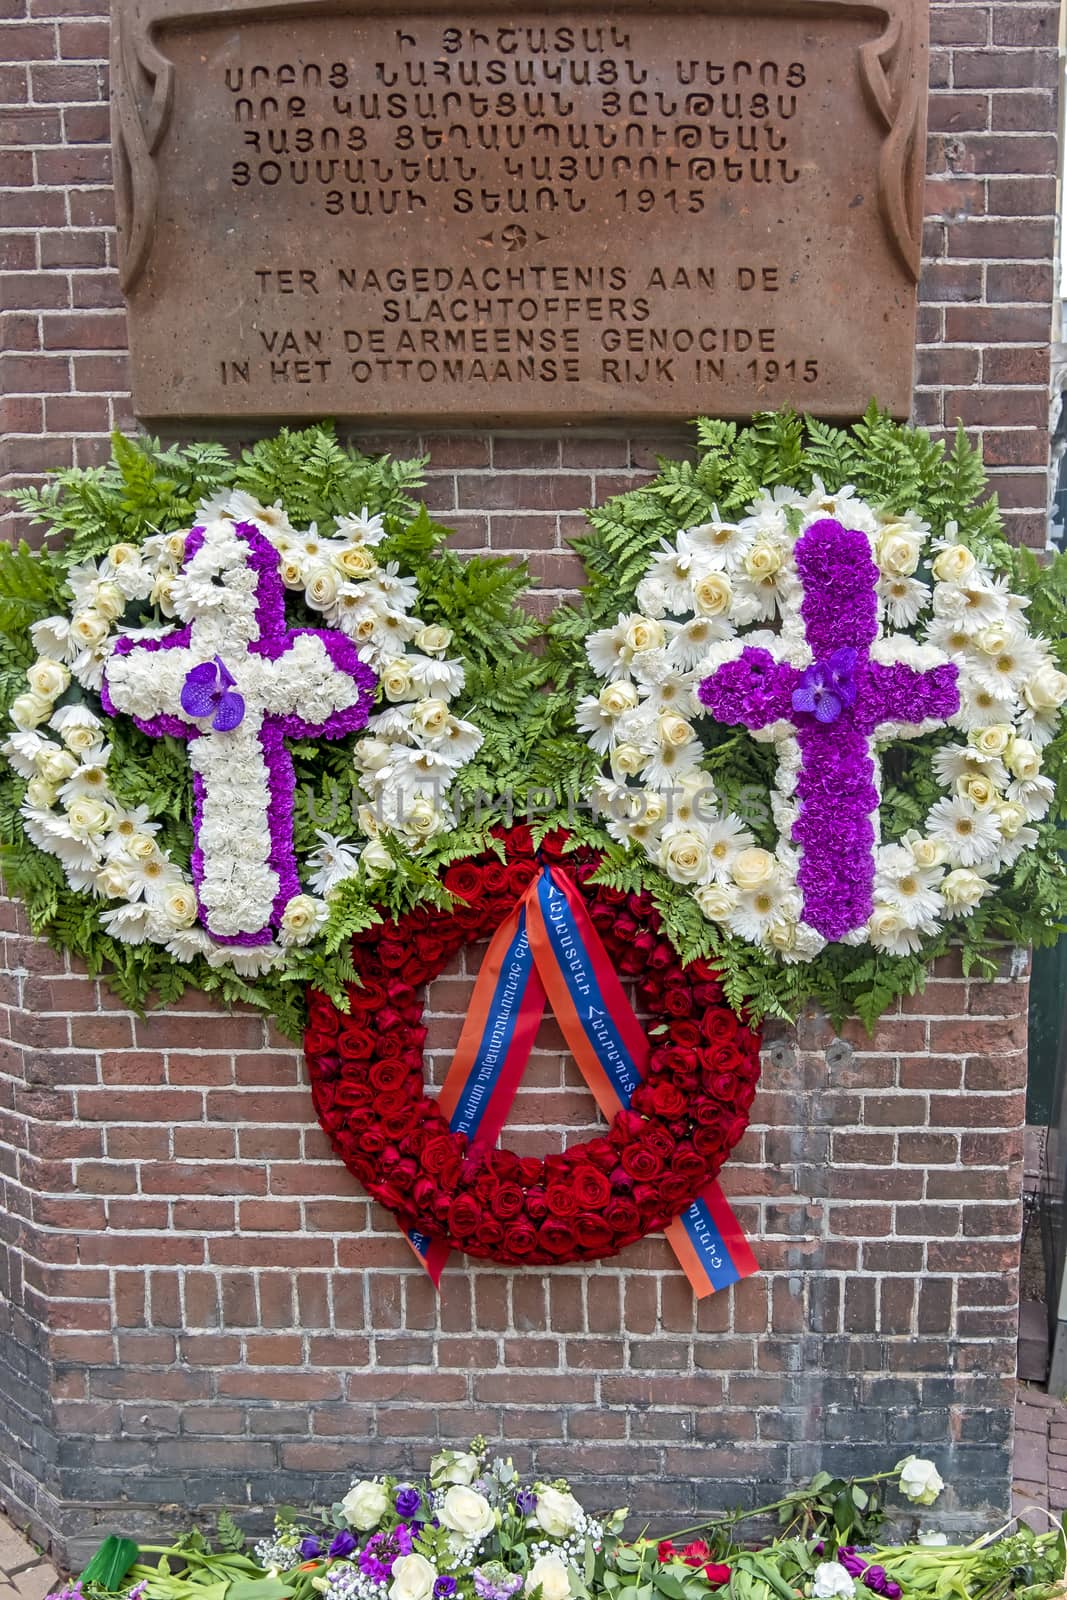 Amsterdam, Netherlands - April 25,2020:Wreaths in memorial of the victims of the Armenian Genocide in the Ottoman Empire, 1915